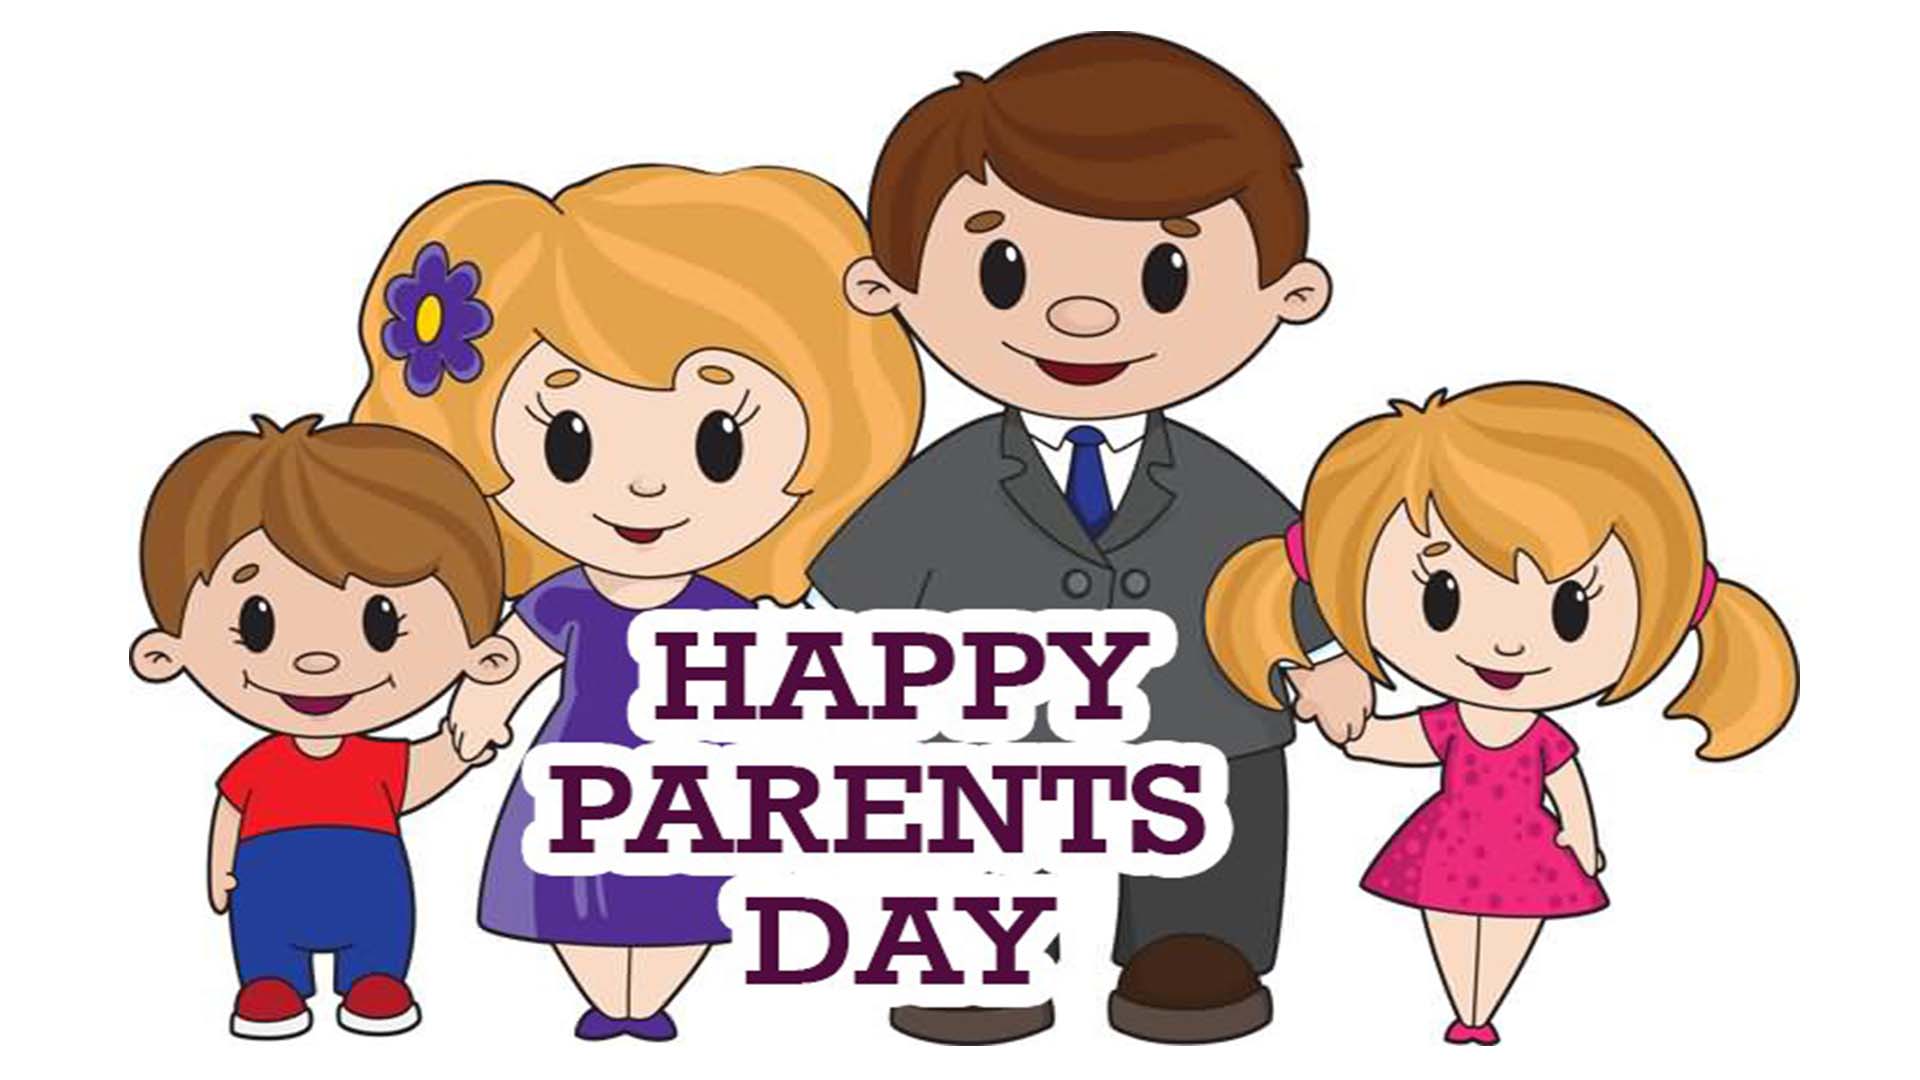 global day of parents image